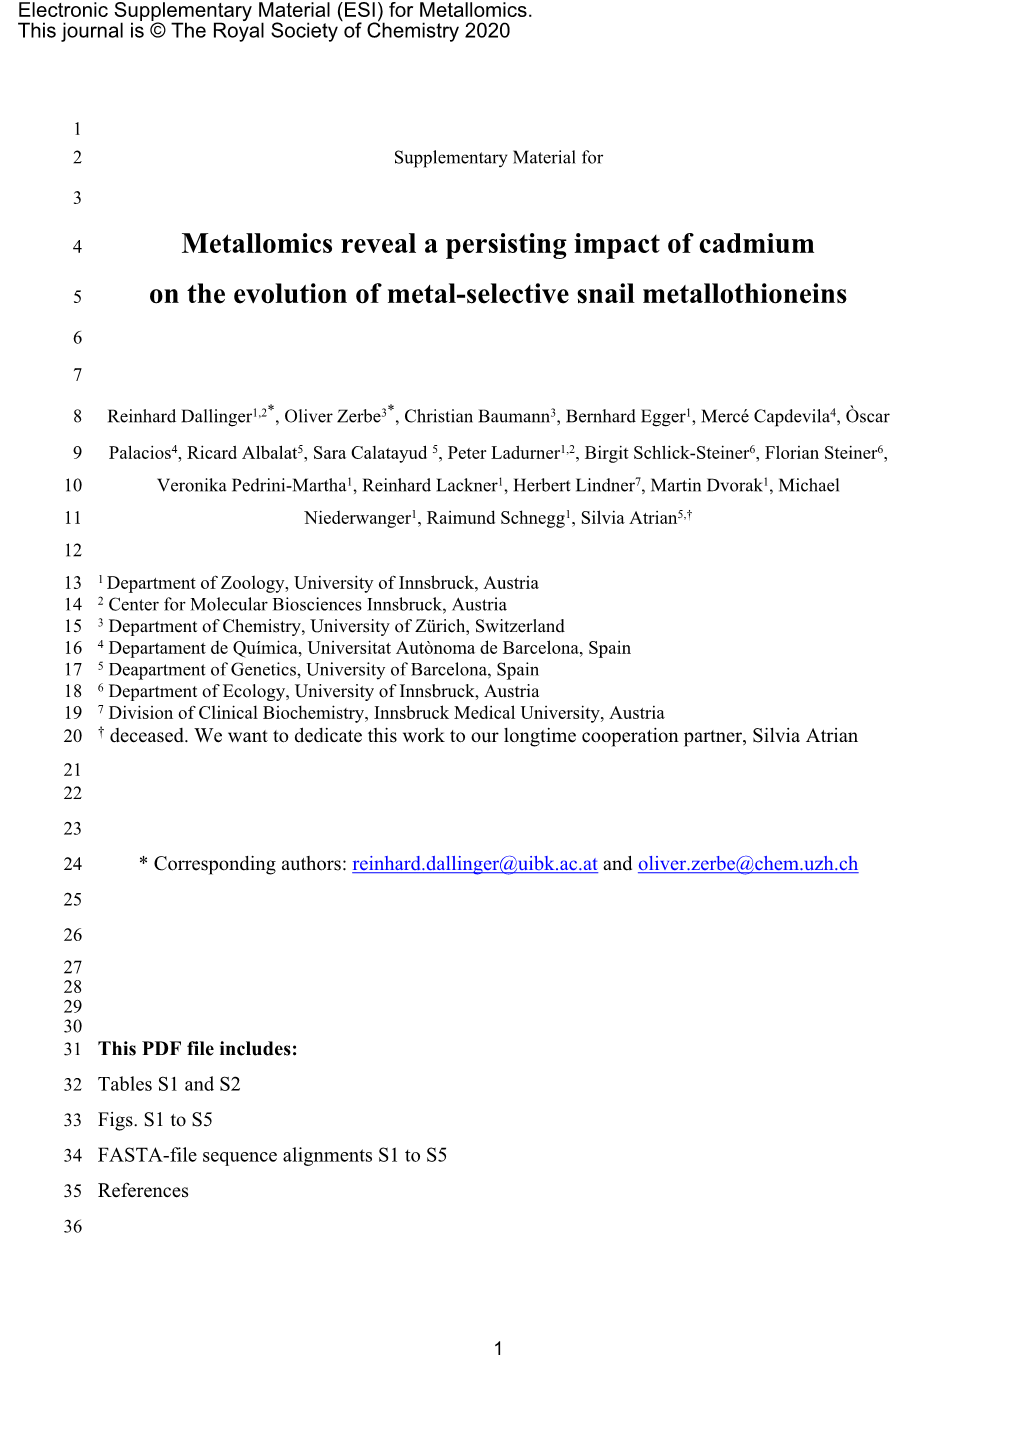 Metallomics Reveal a Persisting Impact of Cadmium on the Evolution of Metal-Selective Snail Metallothioneins